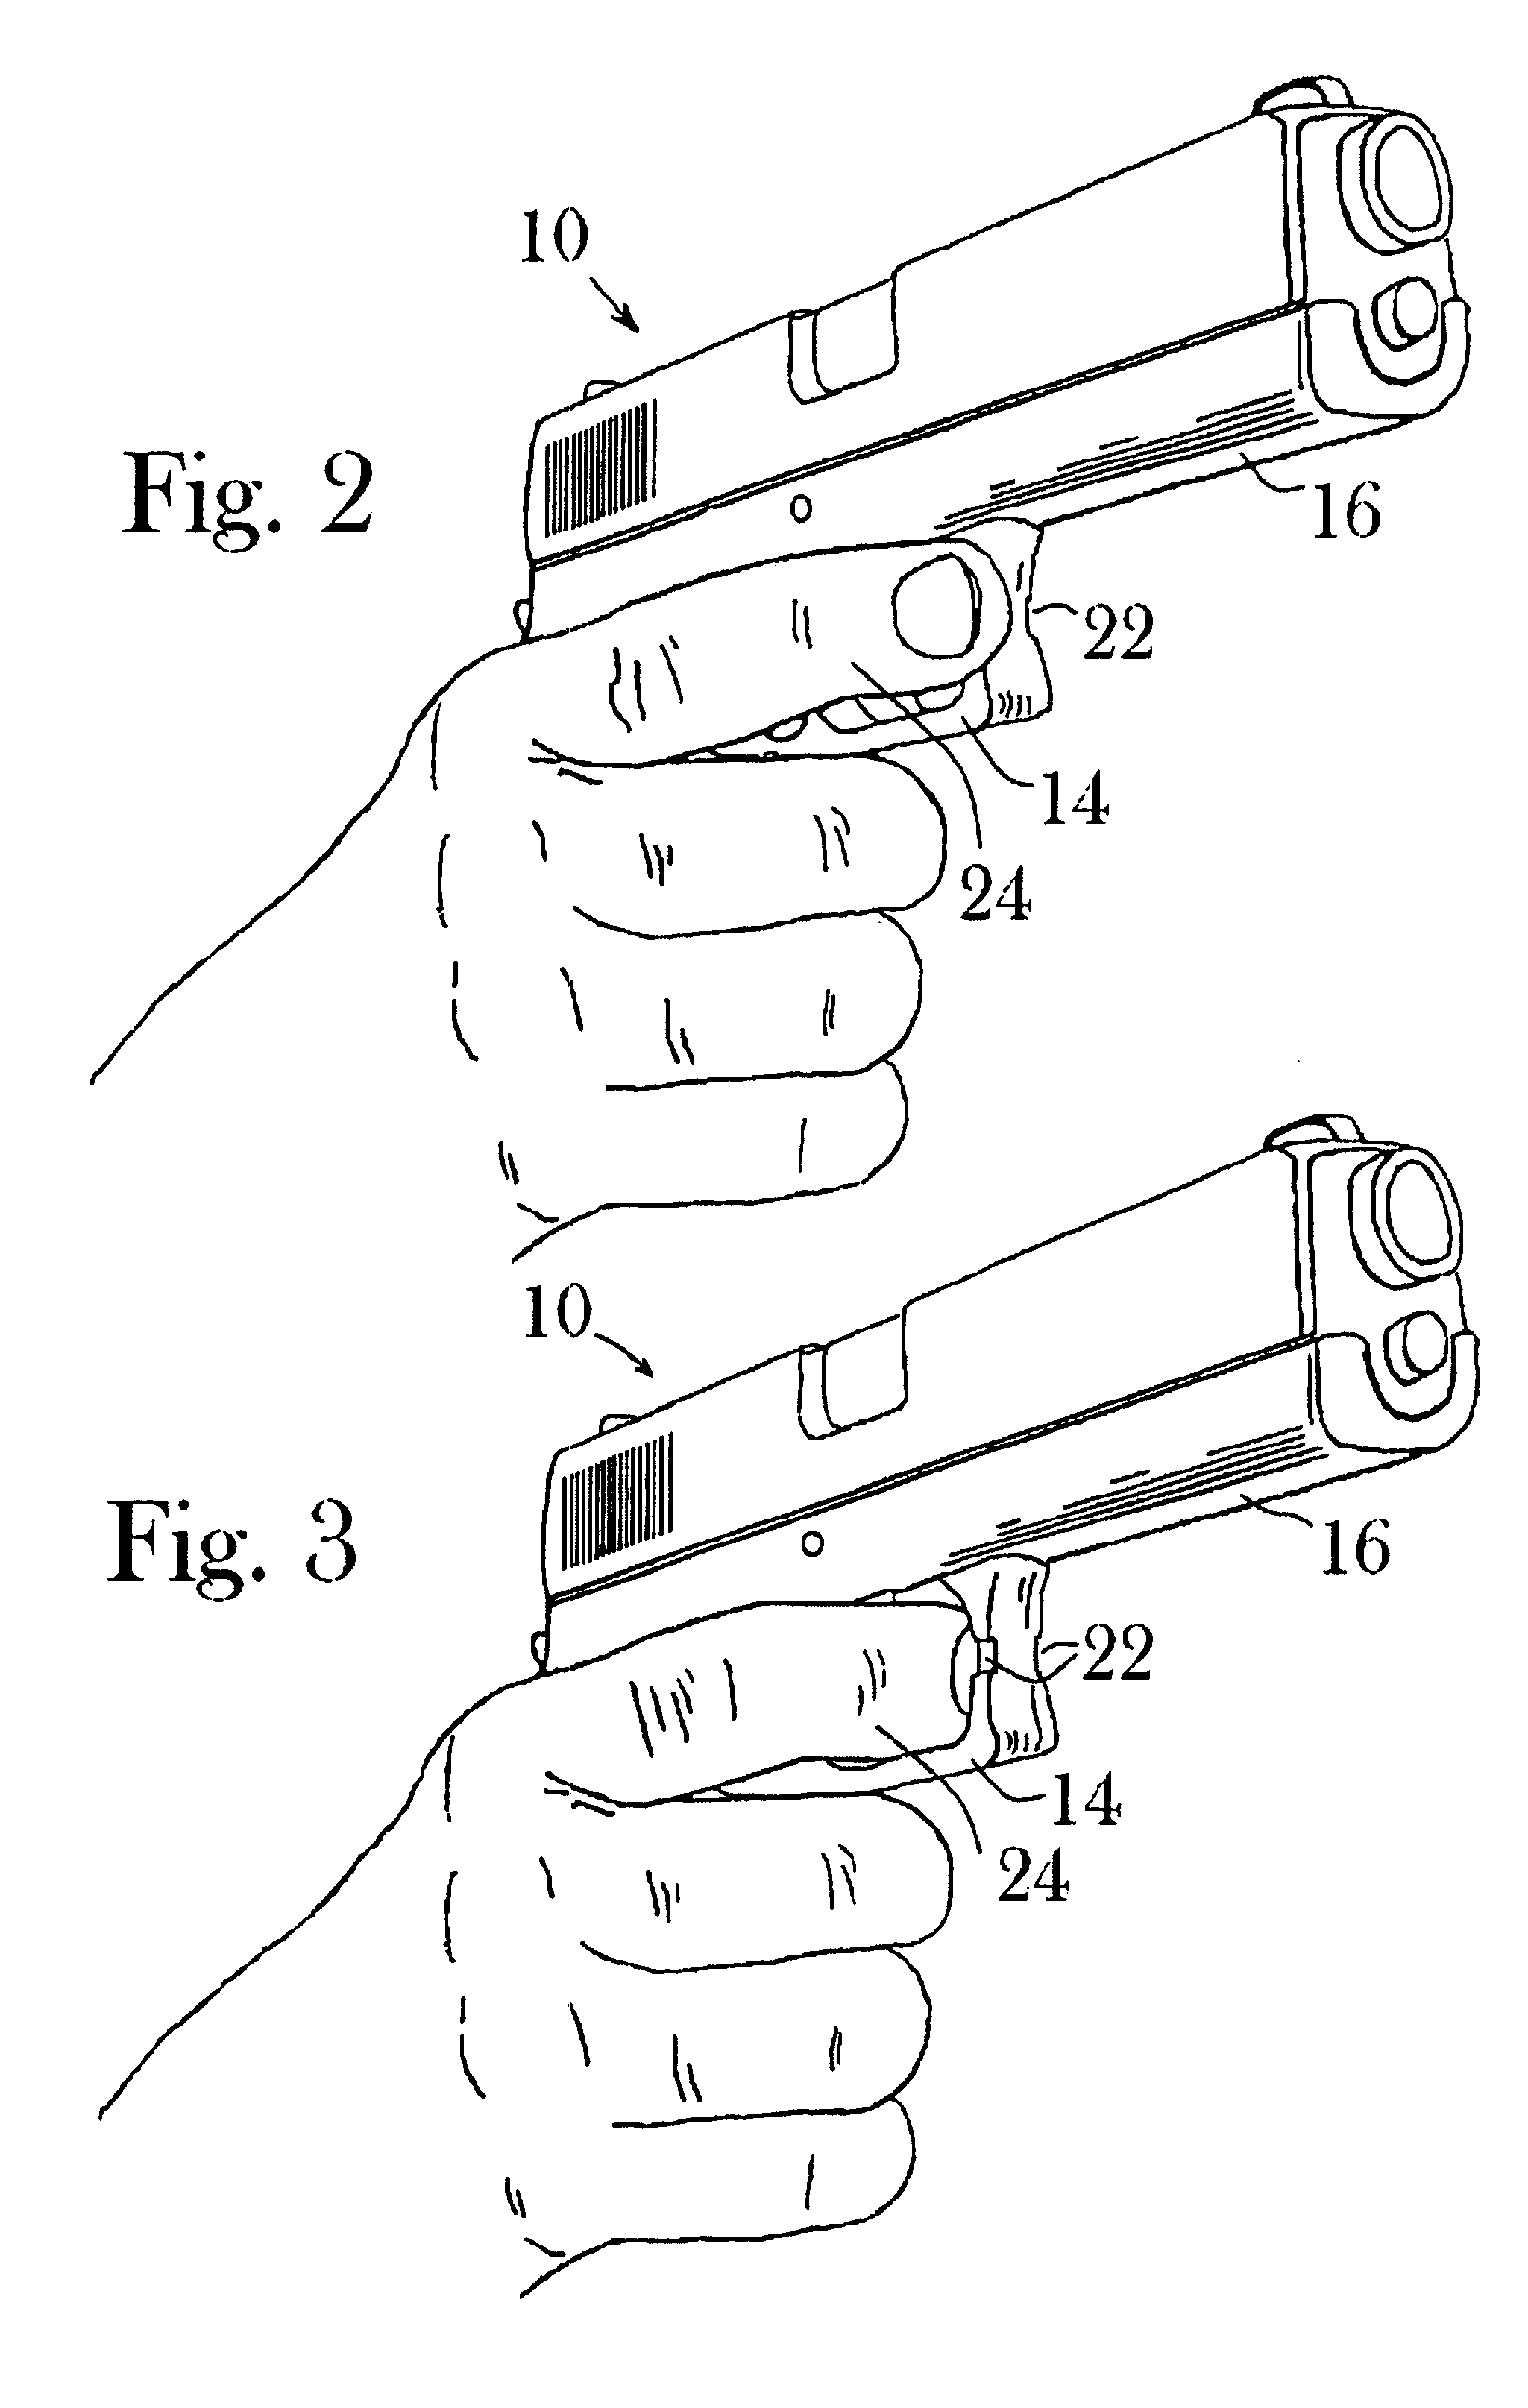 Tactile trigger finger safety cue for firearm or other trigger-activated device